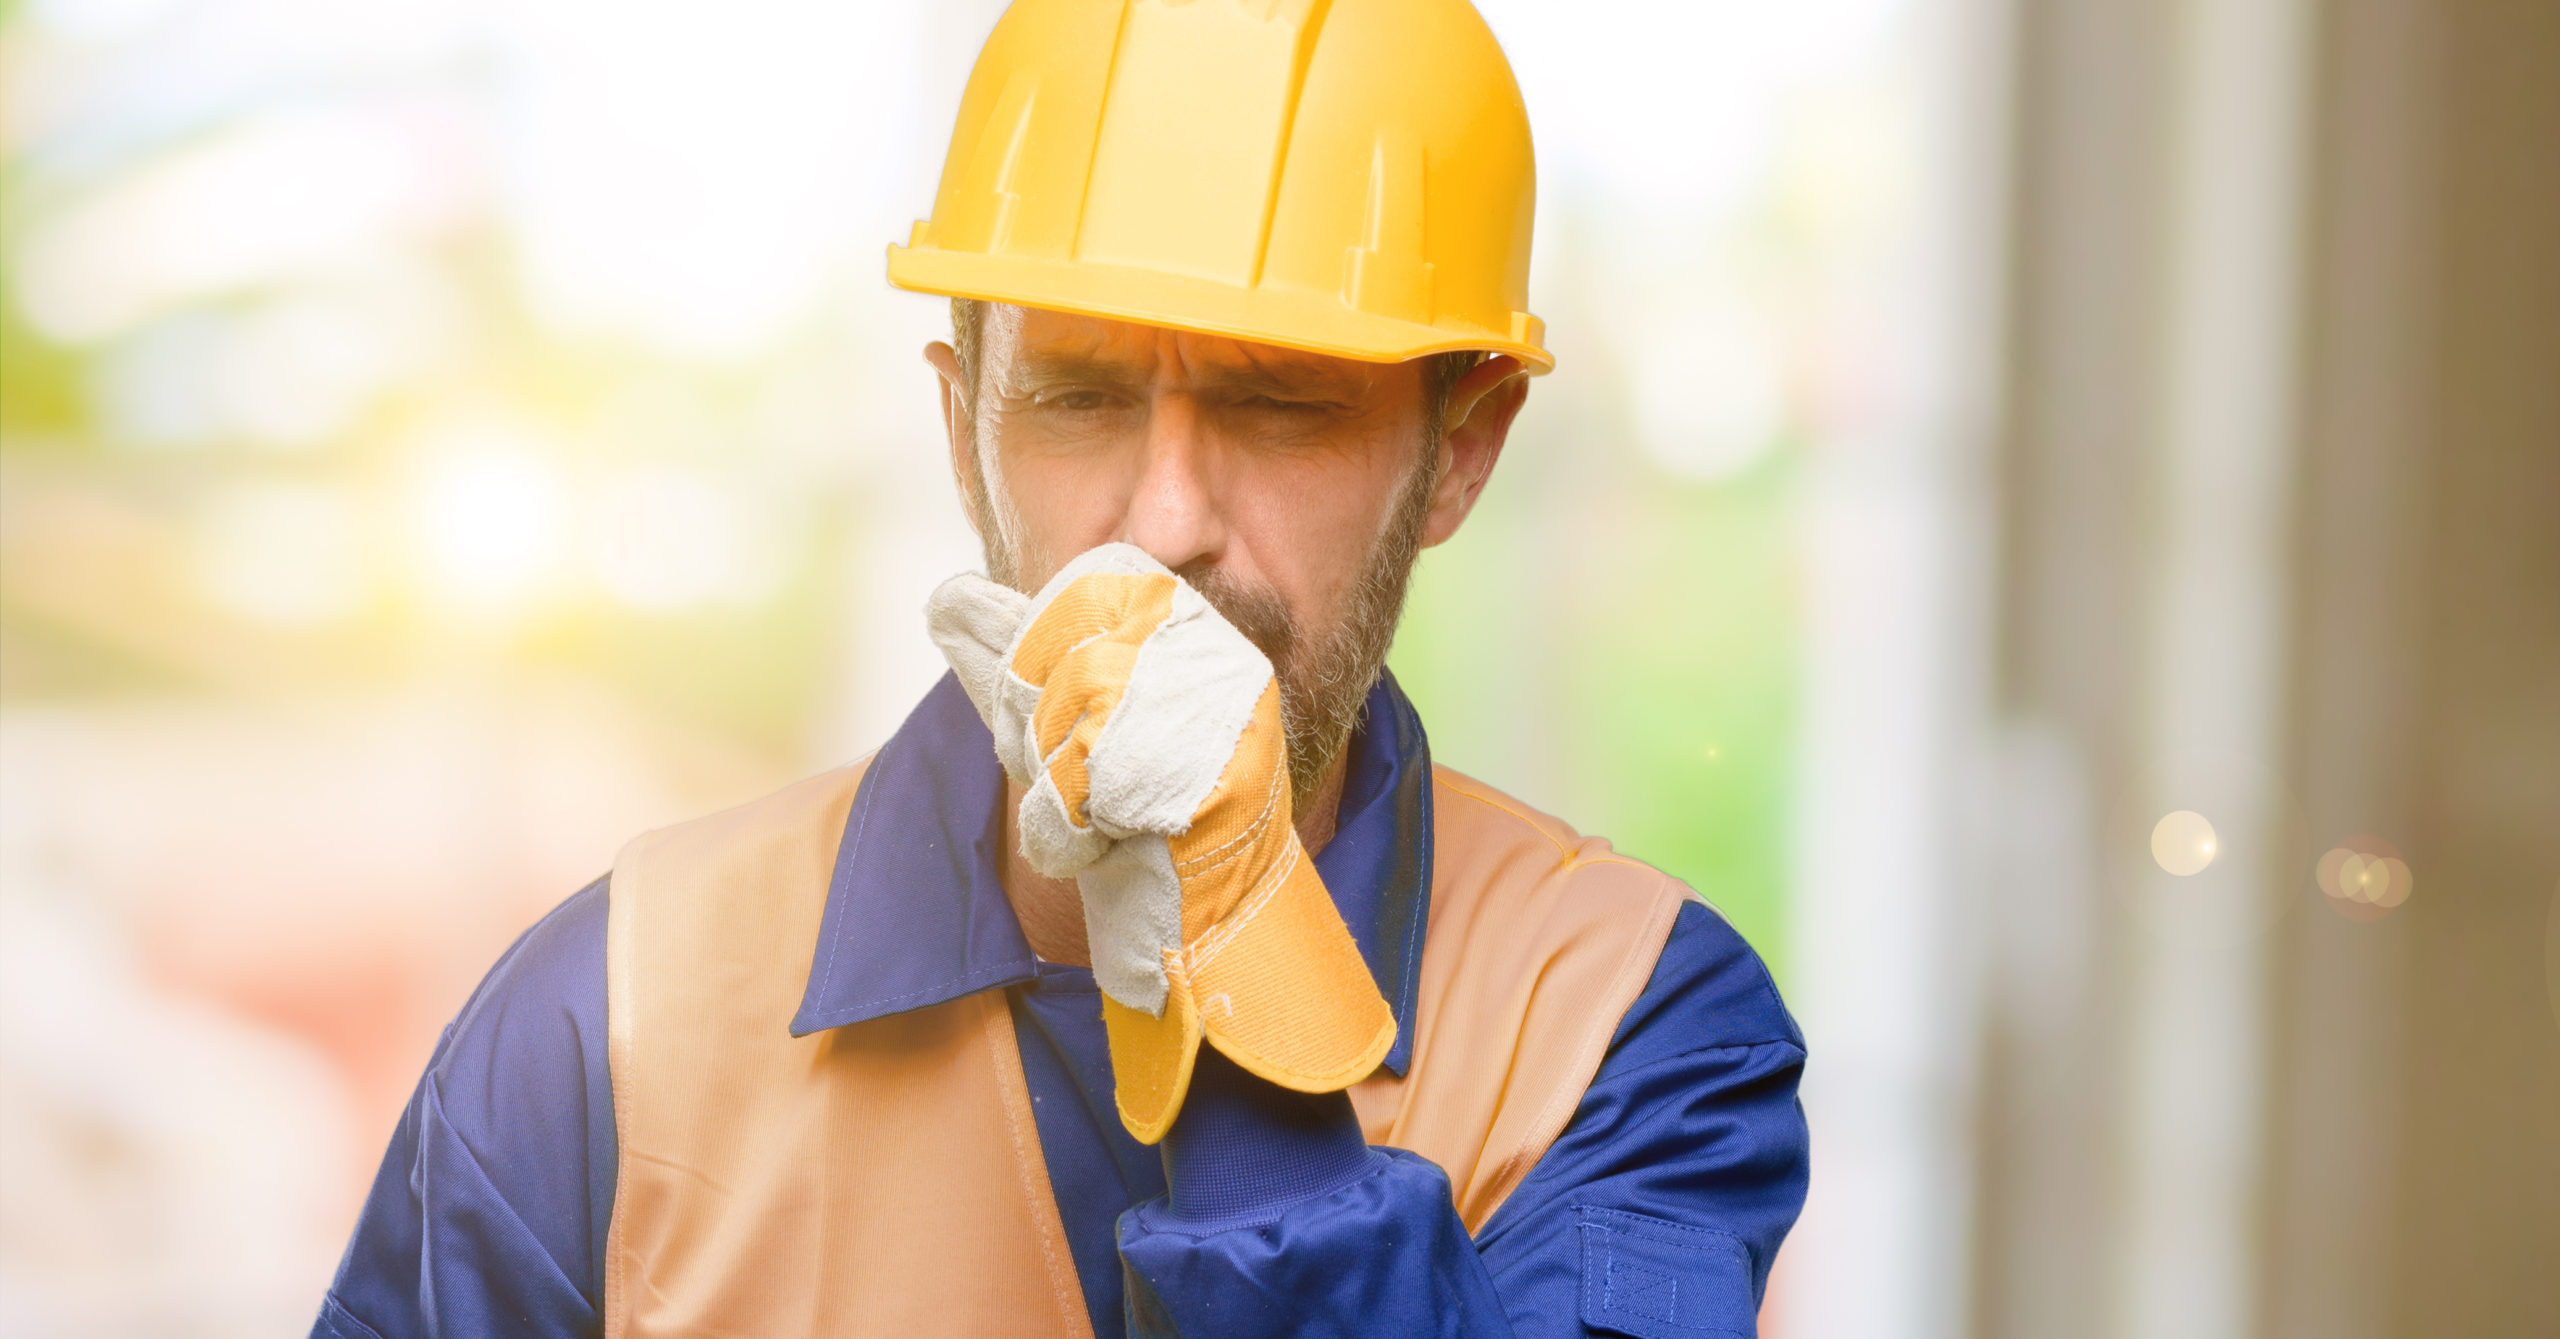 Image of a man in his construction uniform with his fist over his mouth